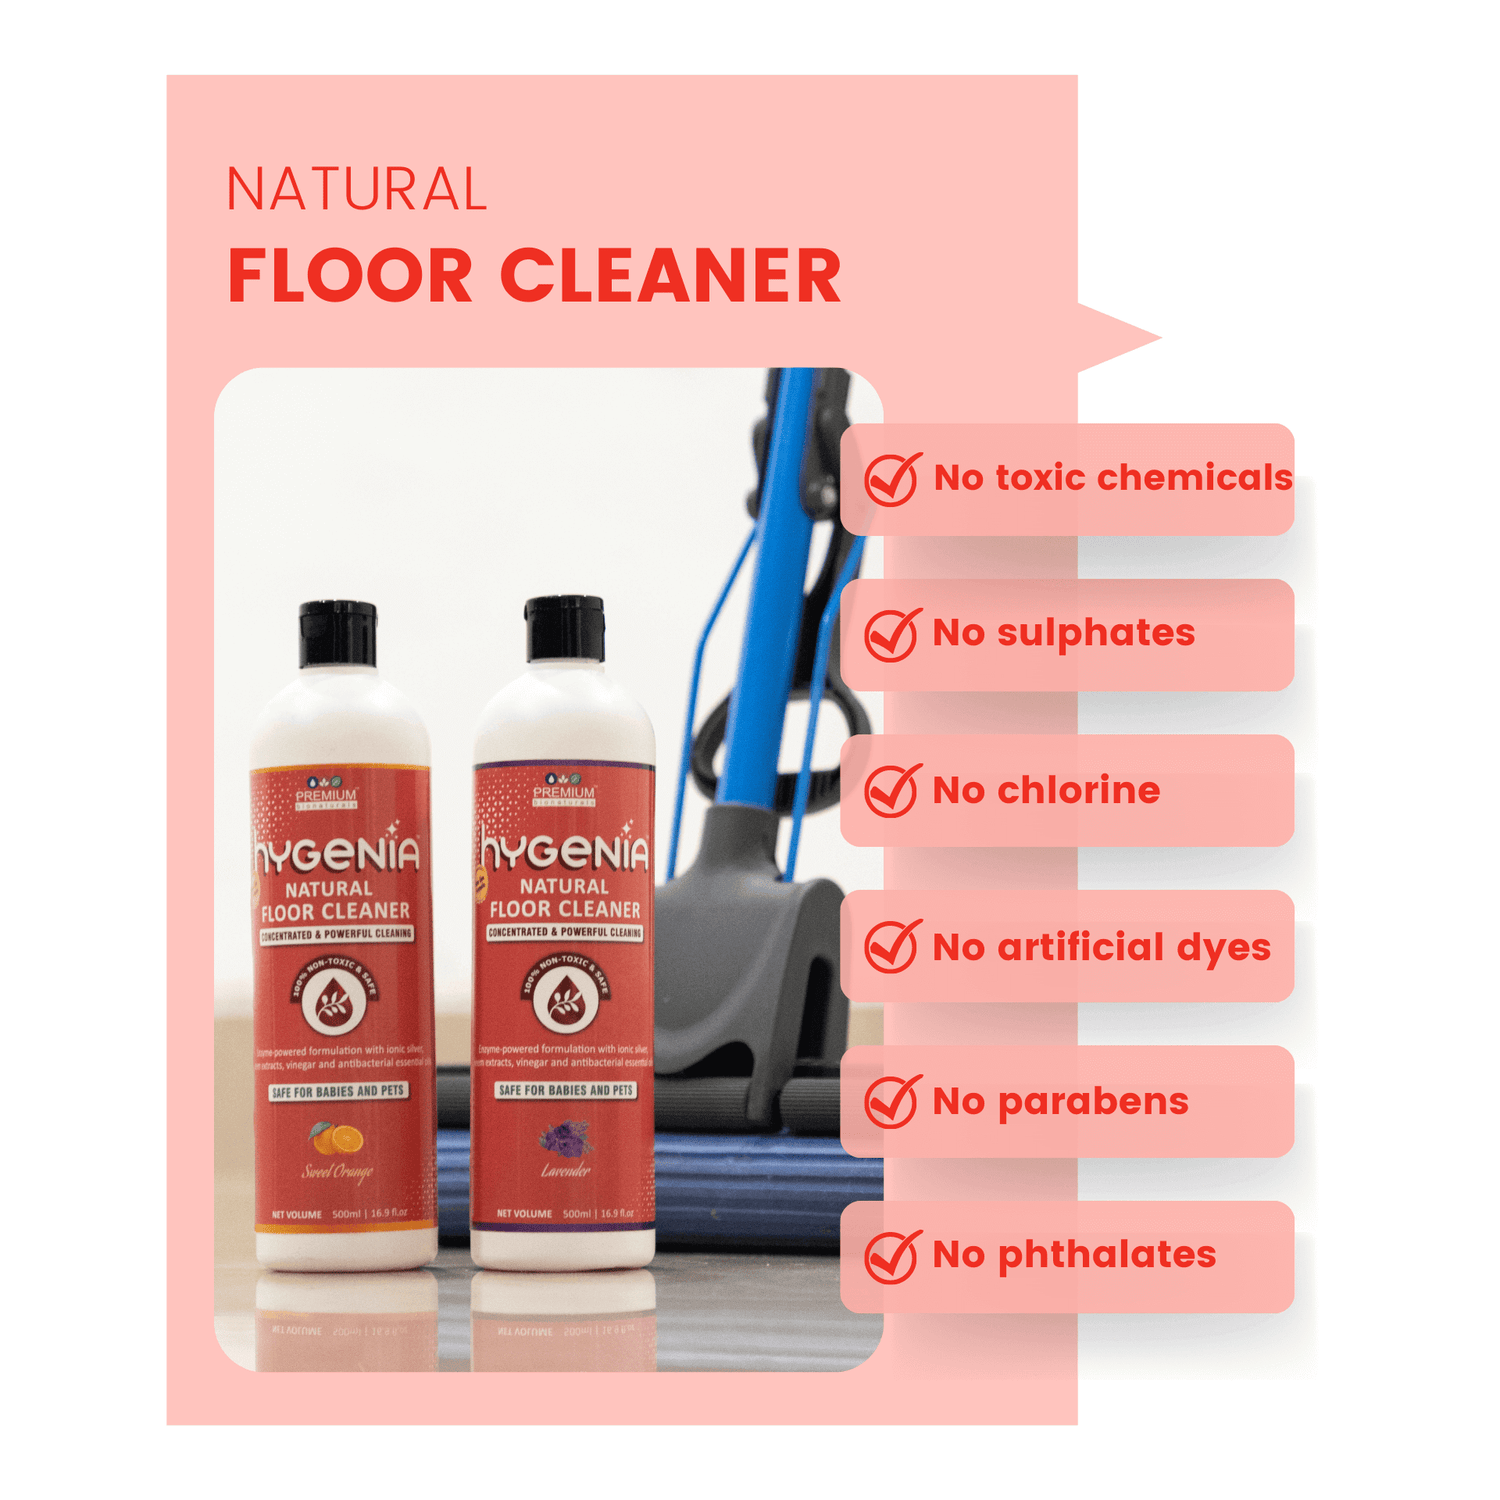 Experience purity with our Natural Floor Cleaner - Lavender, 100% organic for a safe and refreshing cleaning experience.